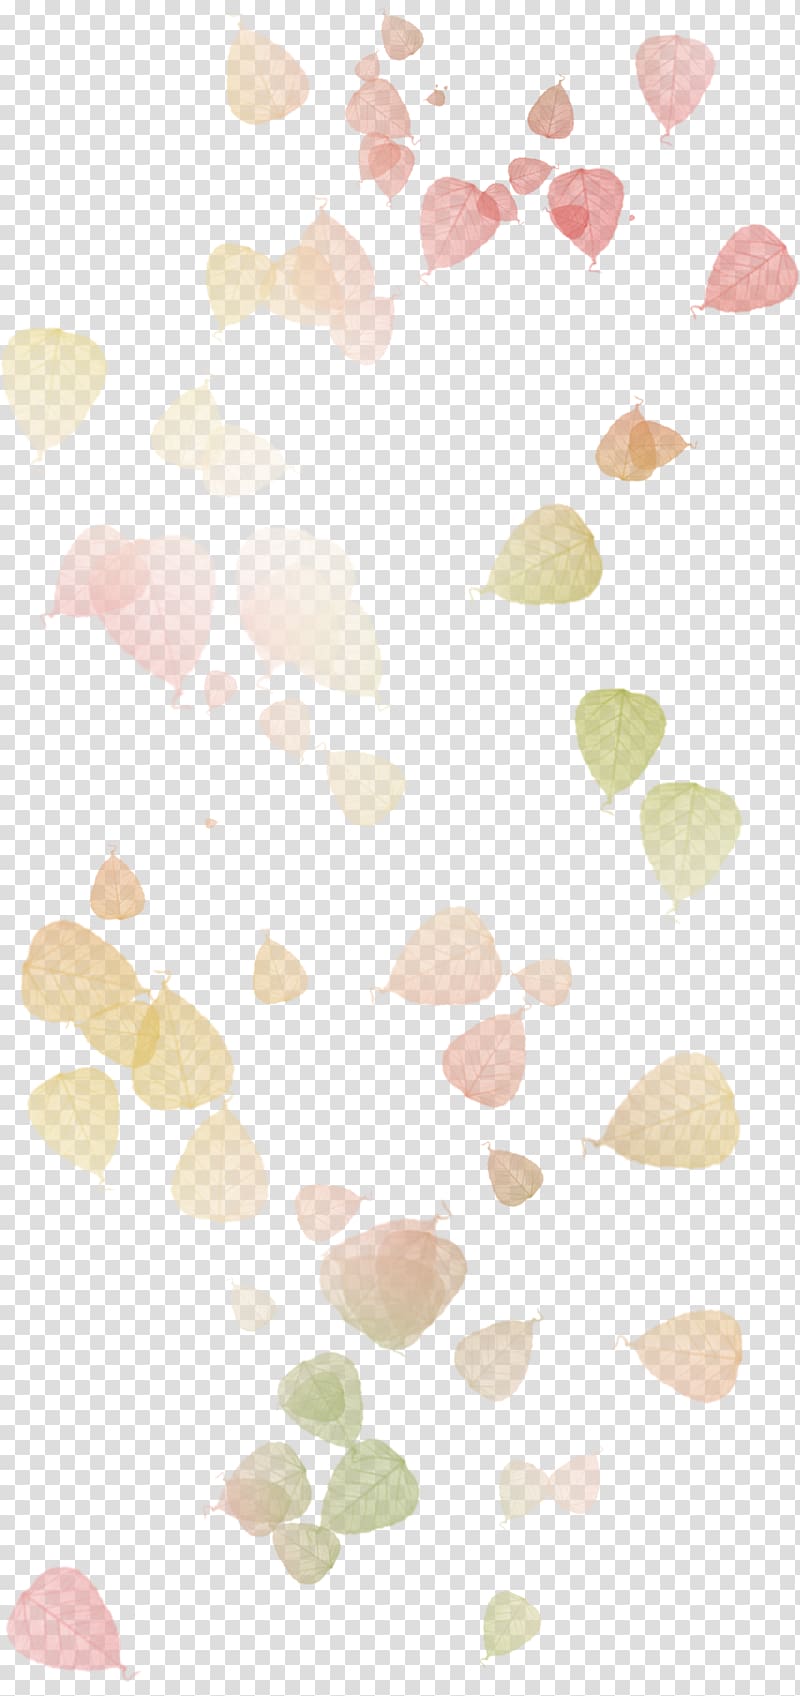 Autumn Leaves Leaf Watercolor painting, Watercolor leaves, assorted-color leaves on blue background transparent background PNG clipart